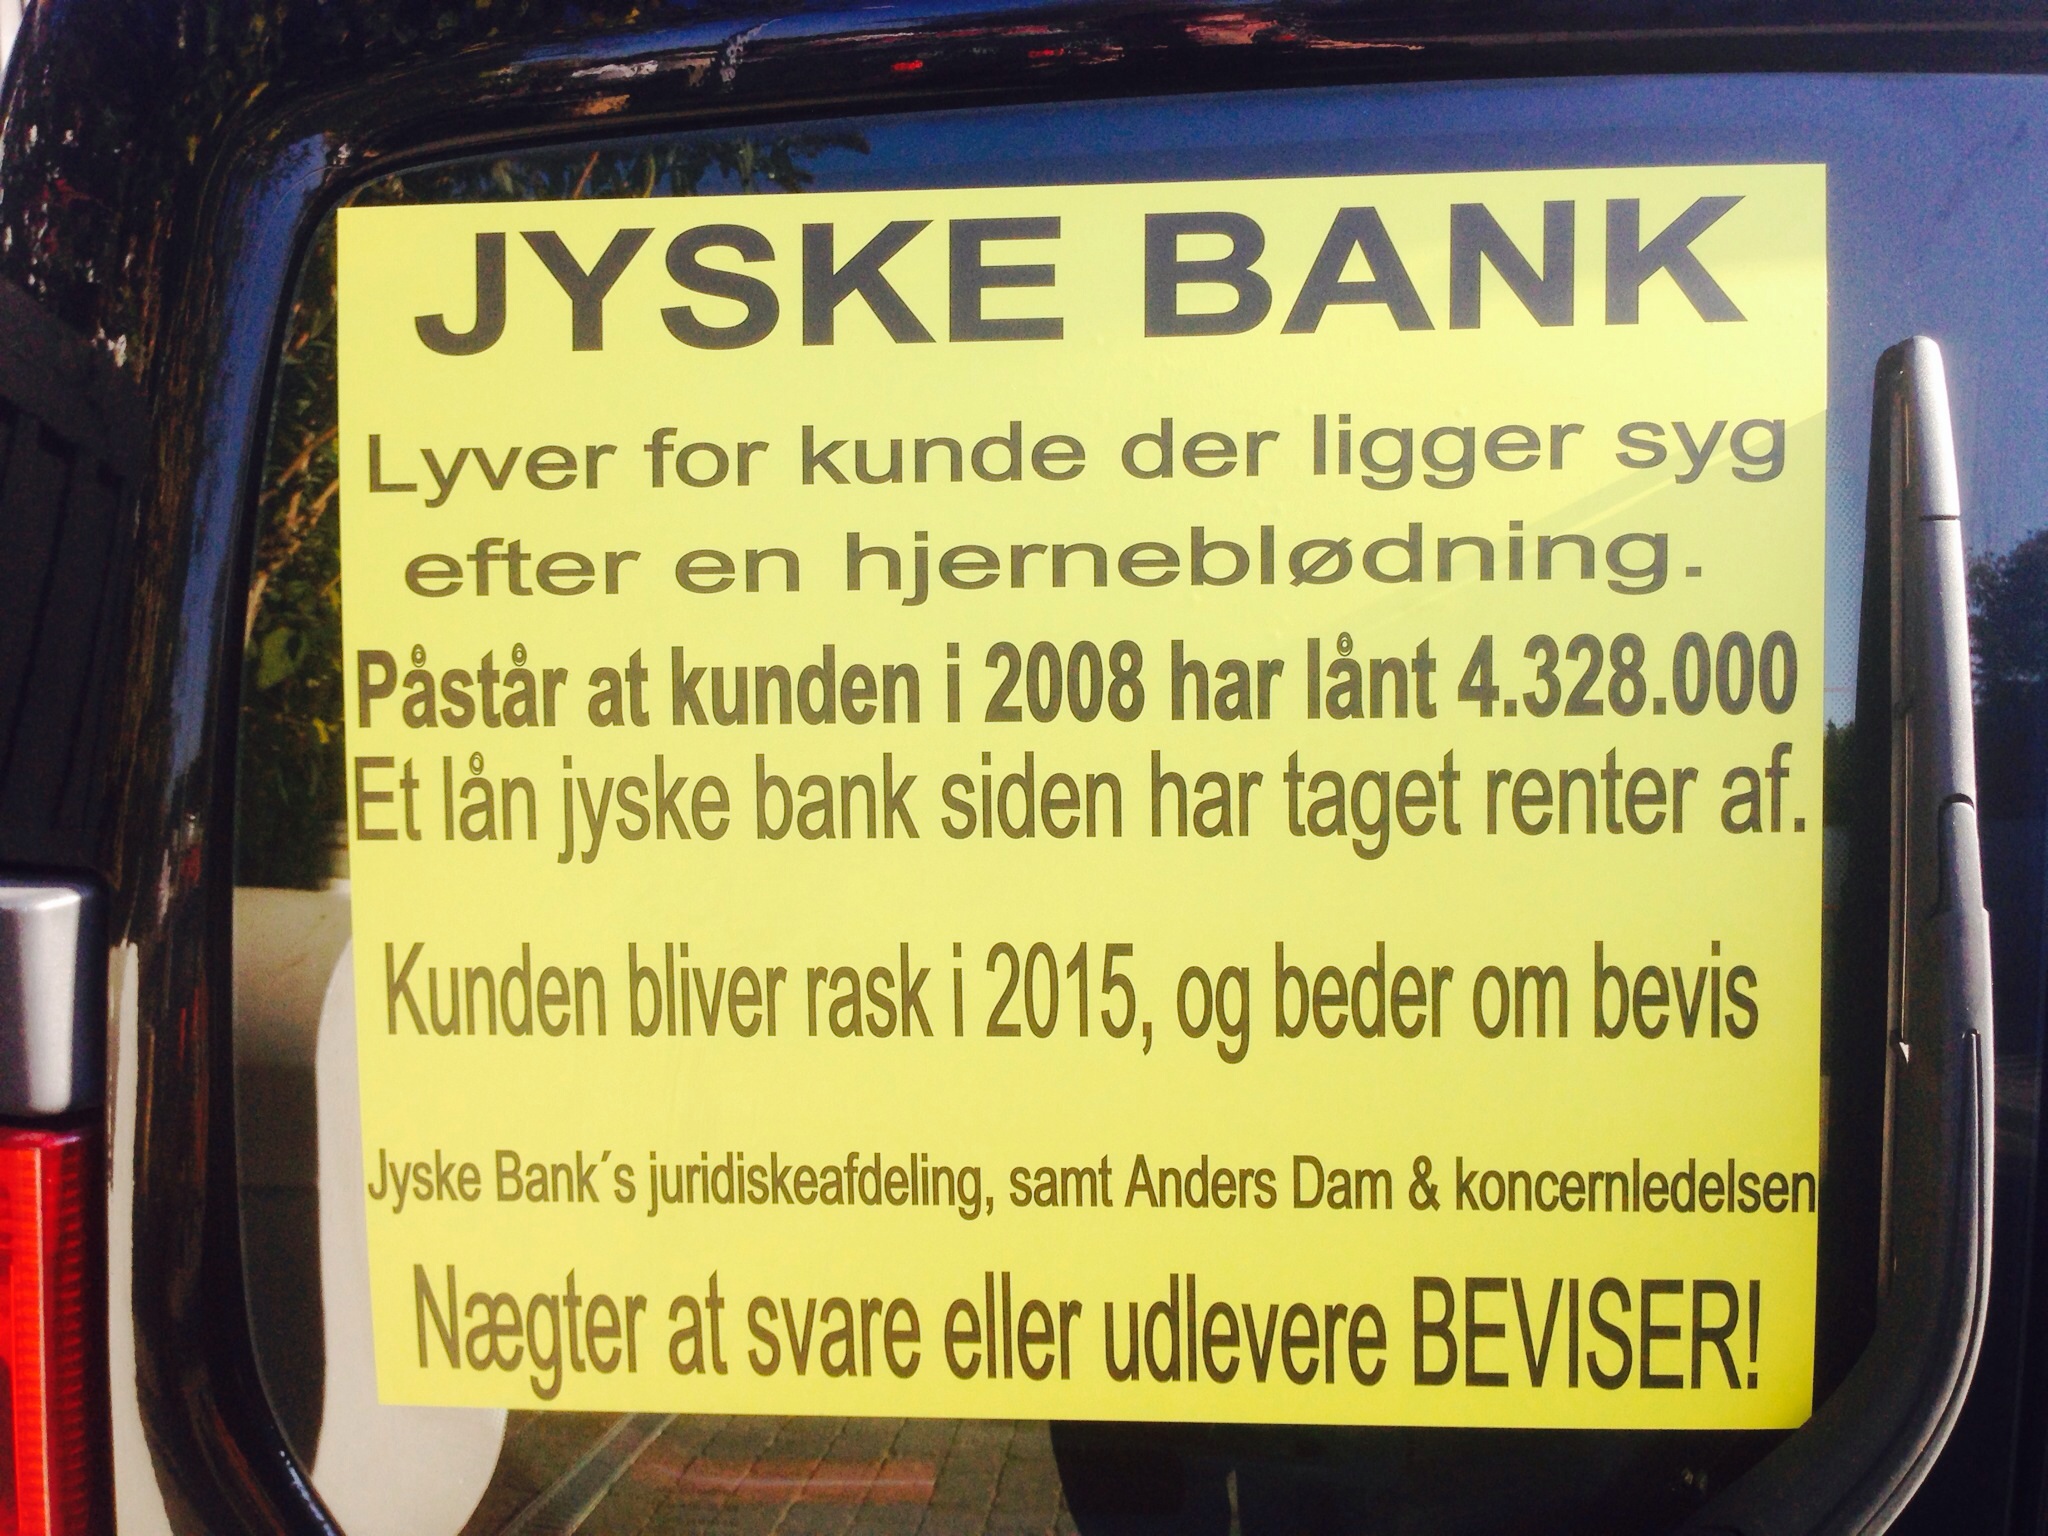 Do we have reason to believe the Jyske Bank Group has paid bribes to Lundgren's lawyers ?.